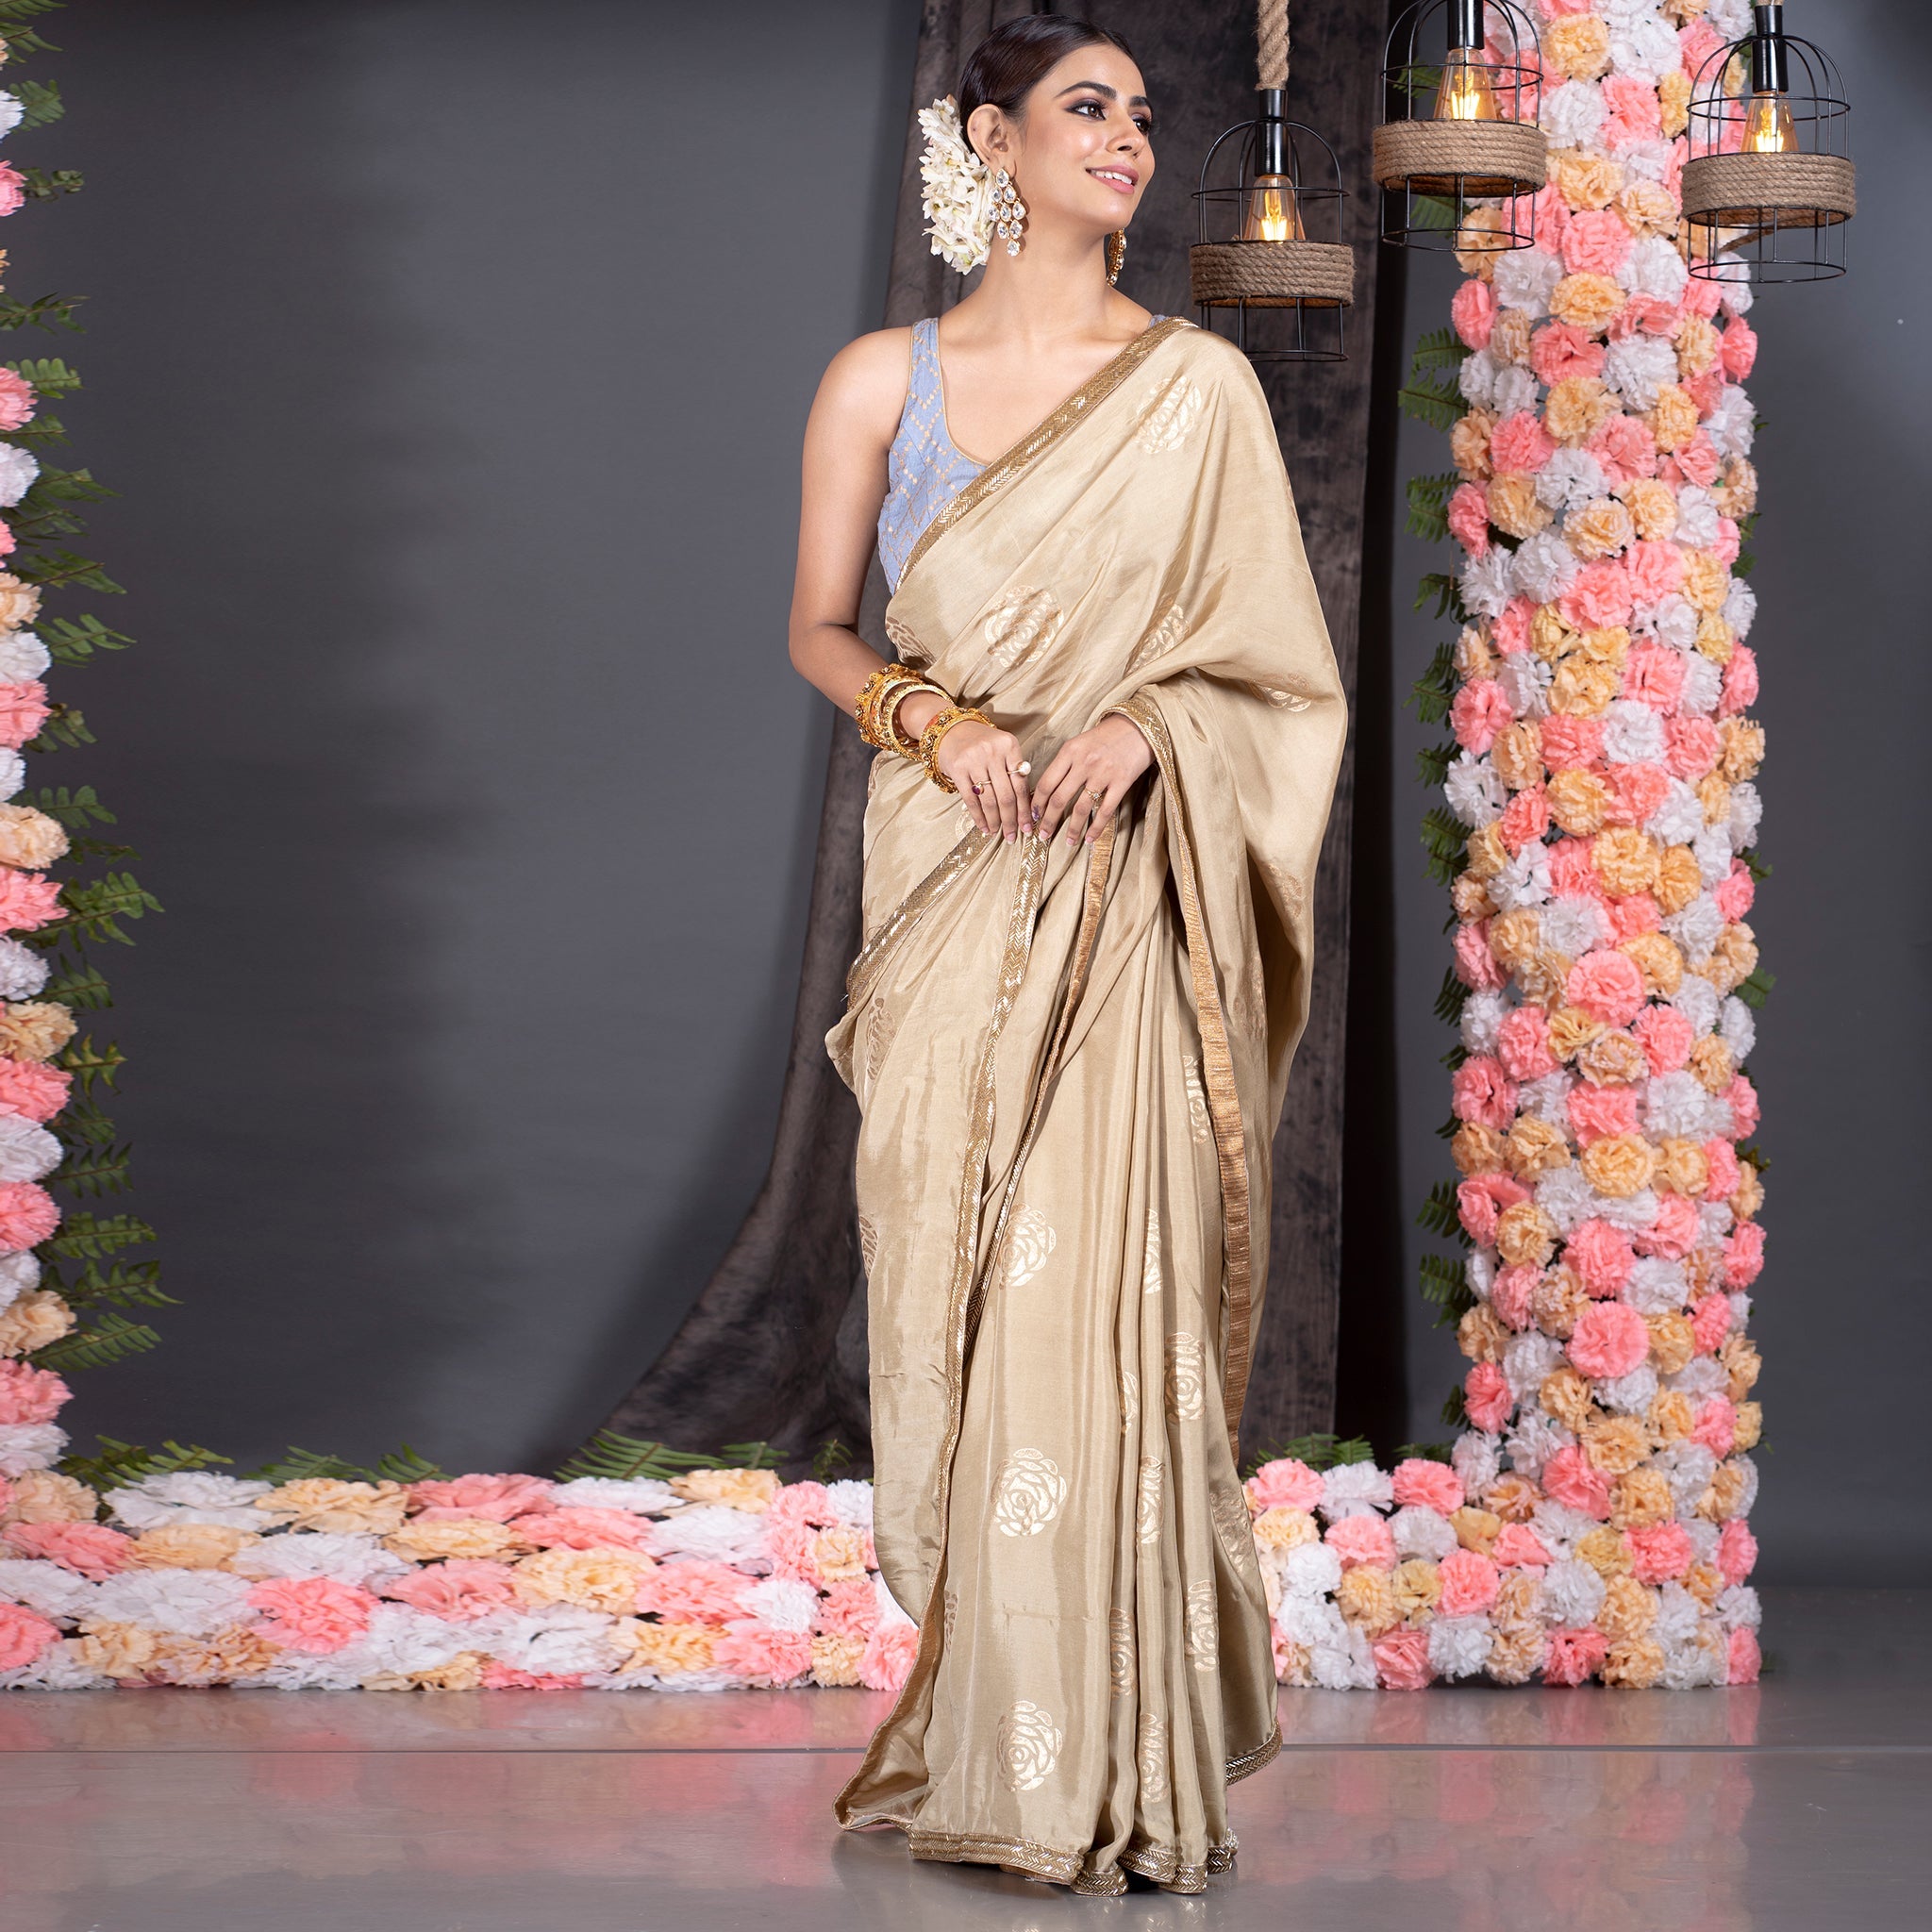 Women's Golden Habutai Silk Saree With Gold Print And Hand Embroidered Lace Border - Boveee